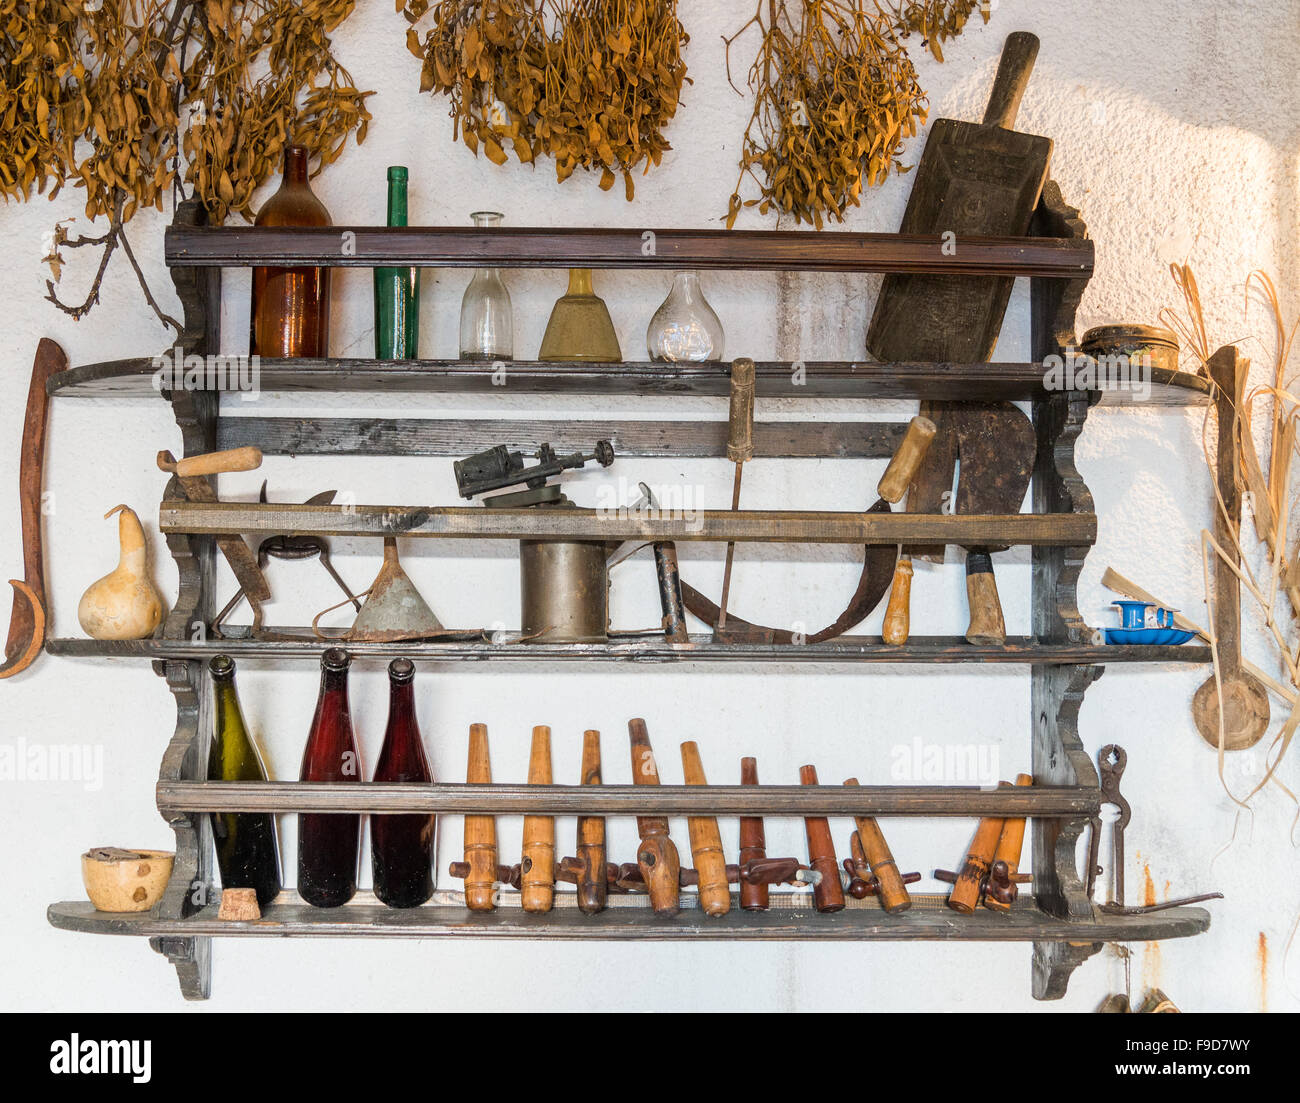 the various antique tools and household items Stock Photo